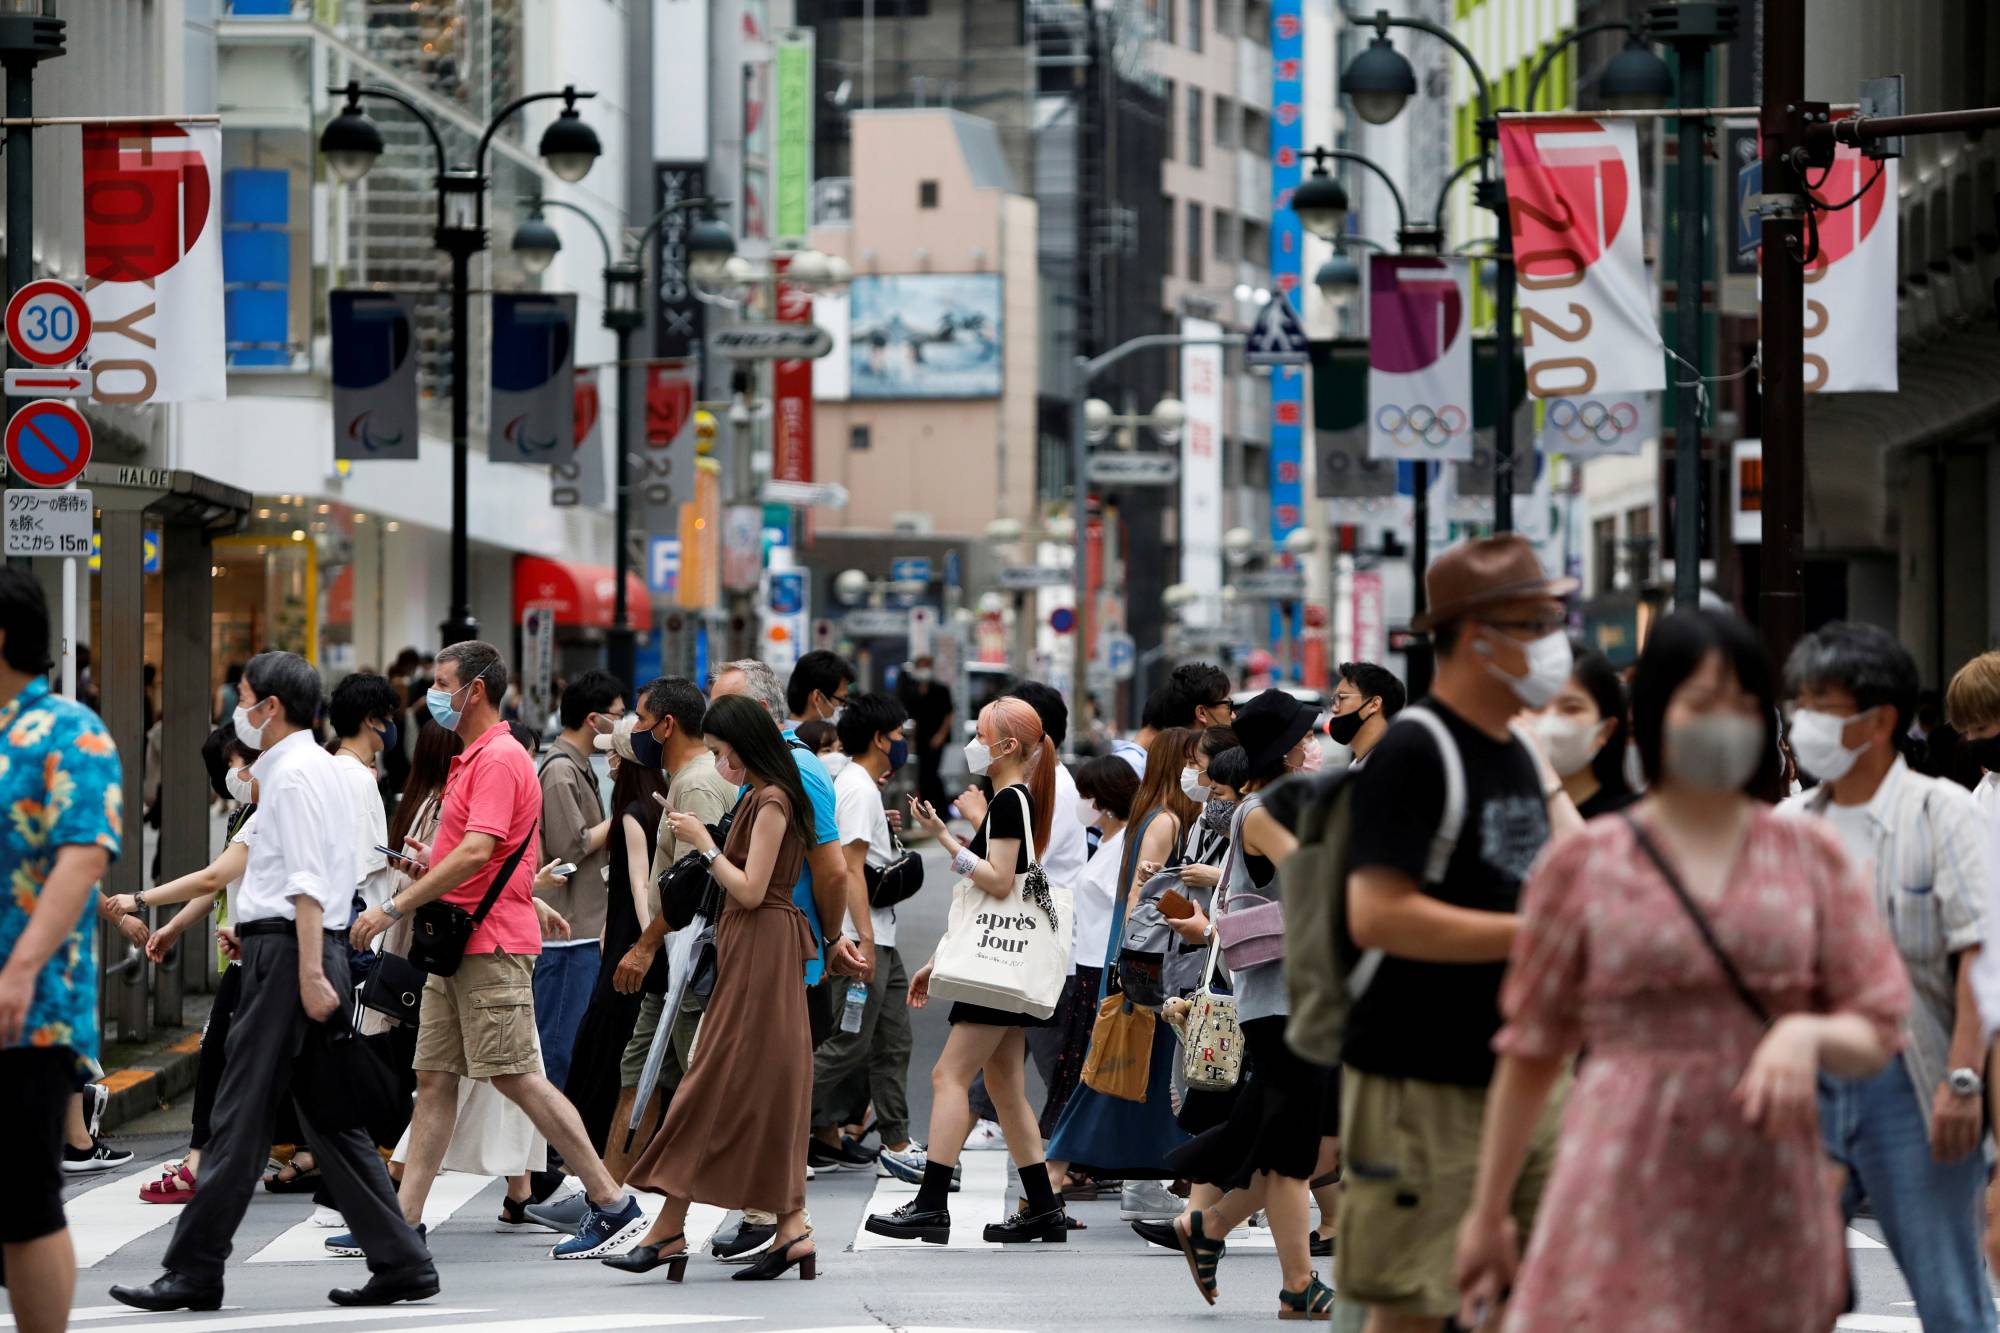 Pedestrians at a crossing in a shopping area of Shibuya Ward, Tokyo, on Aug. 7. | REUTERS